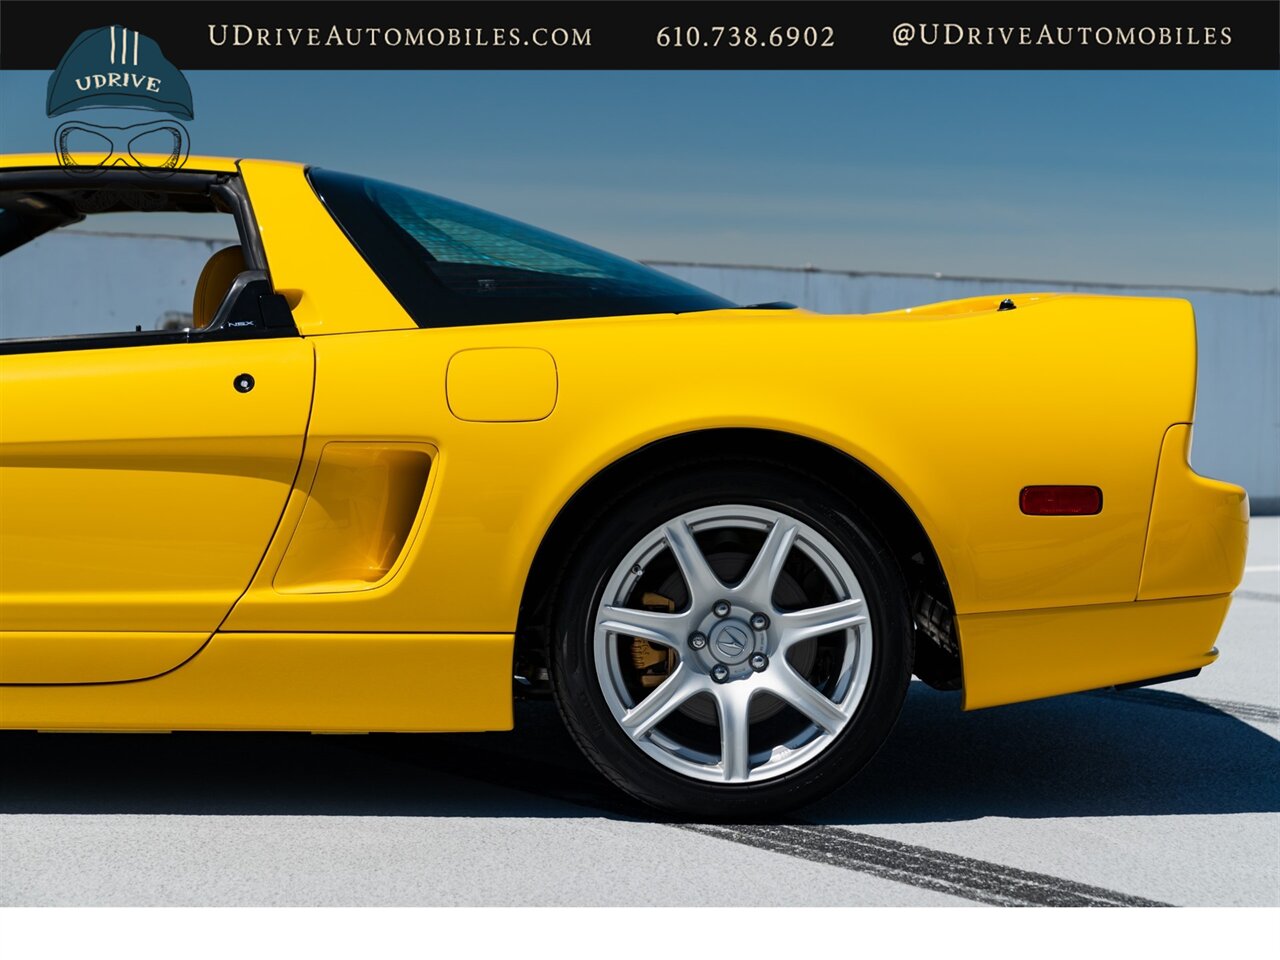 2003 Acura NSX NSX-T  Spa Yellow over Yellow Lthr 1 of 13 Produced - Photo 24 - West Chester, PA 19382